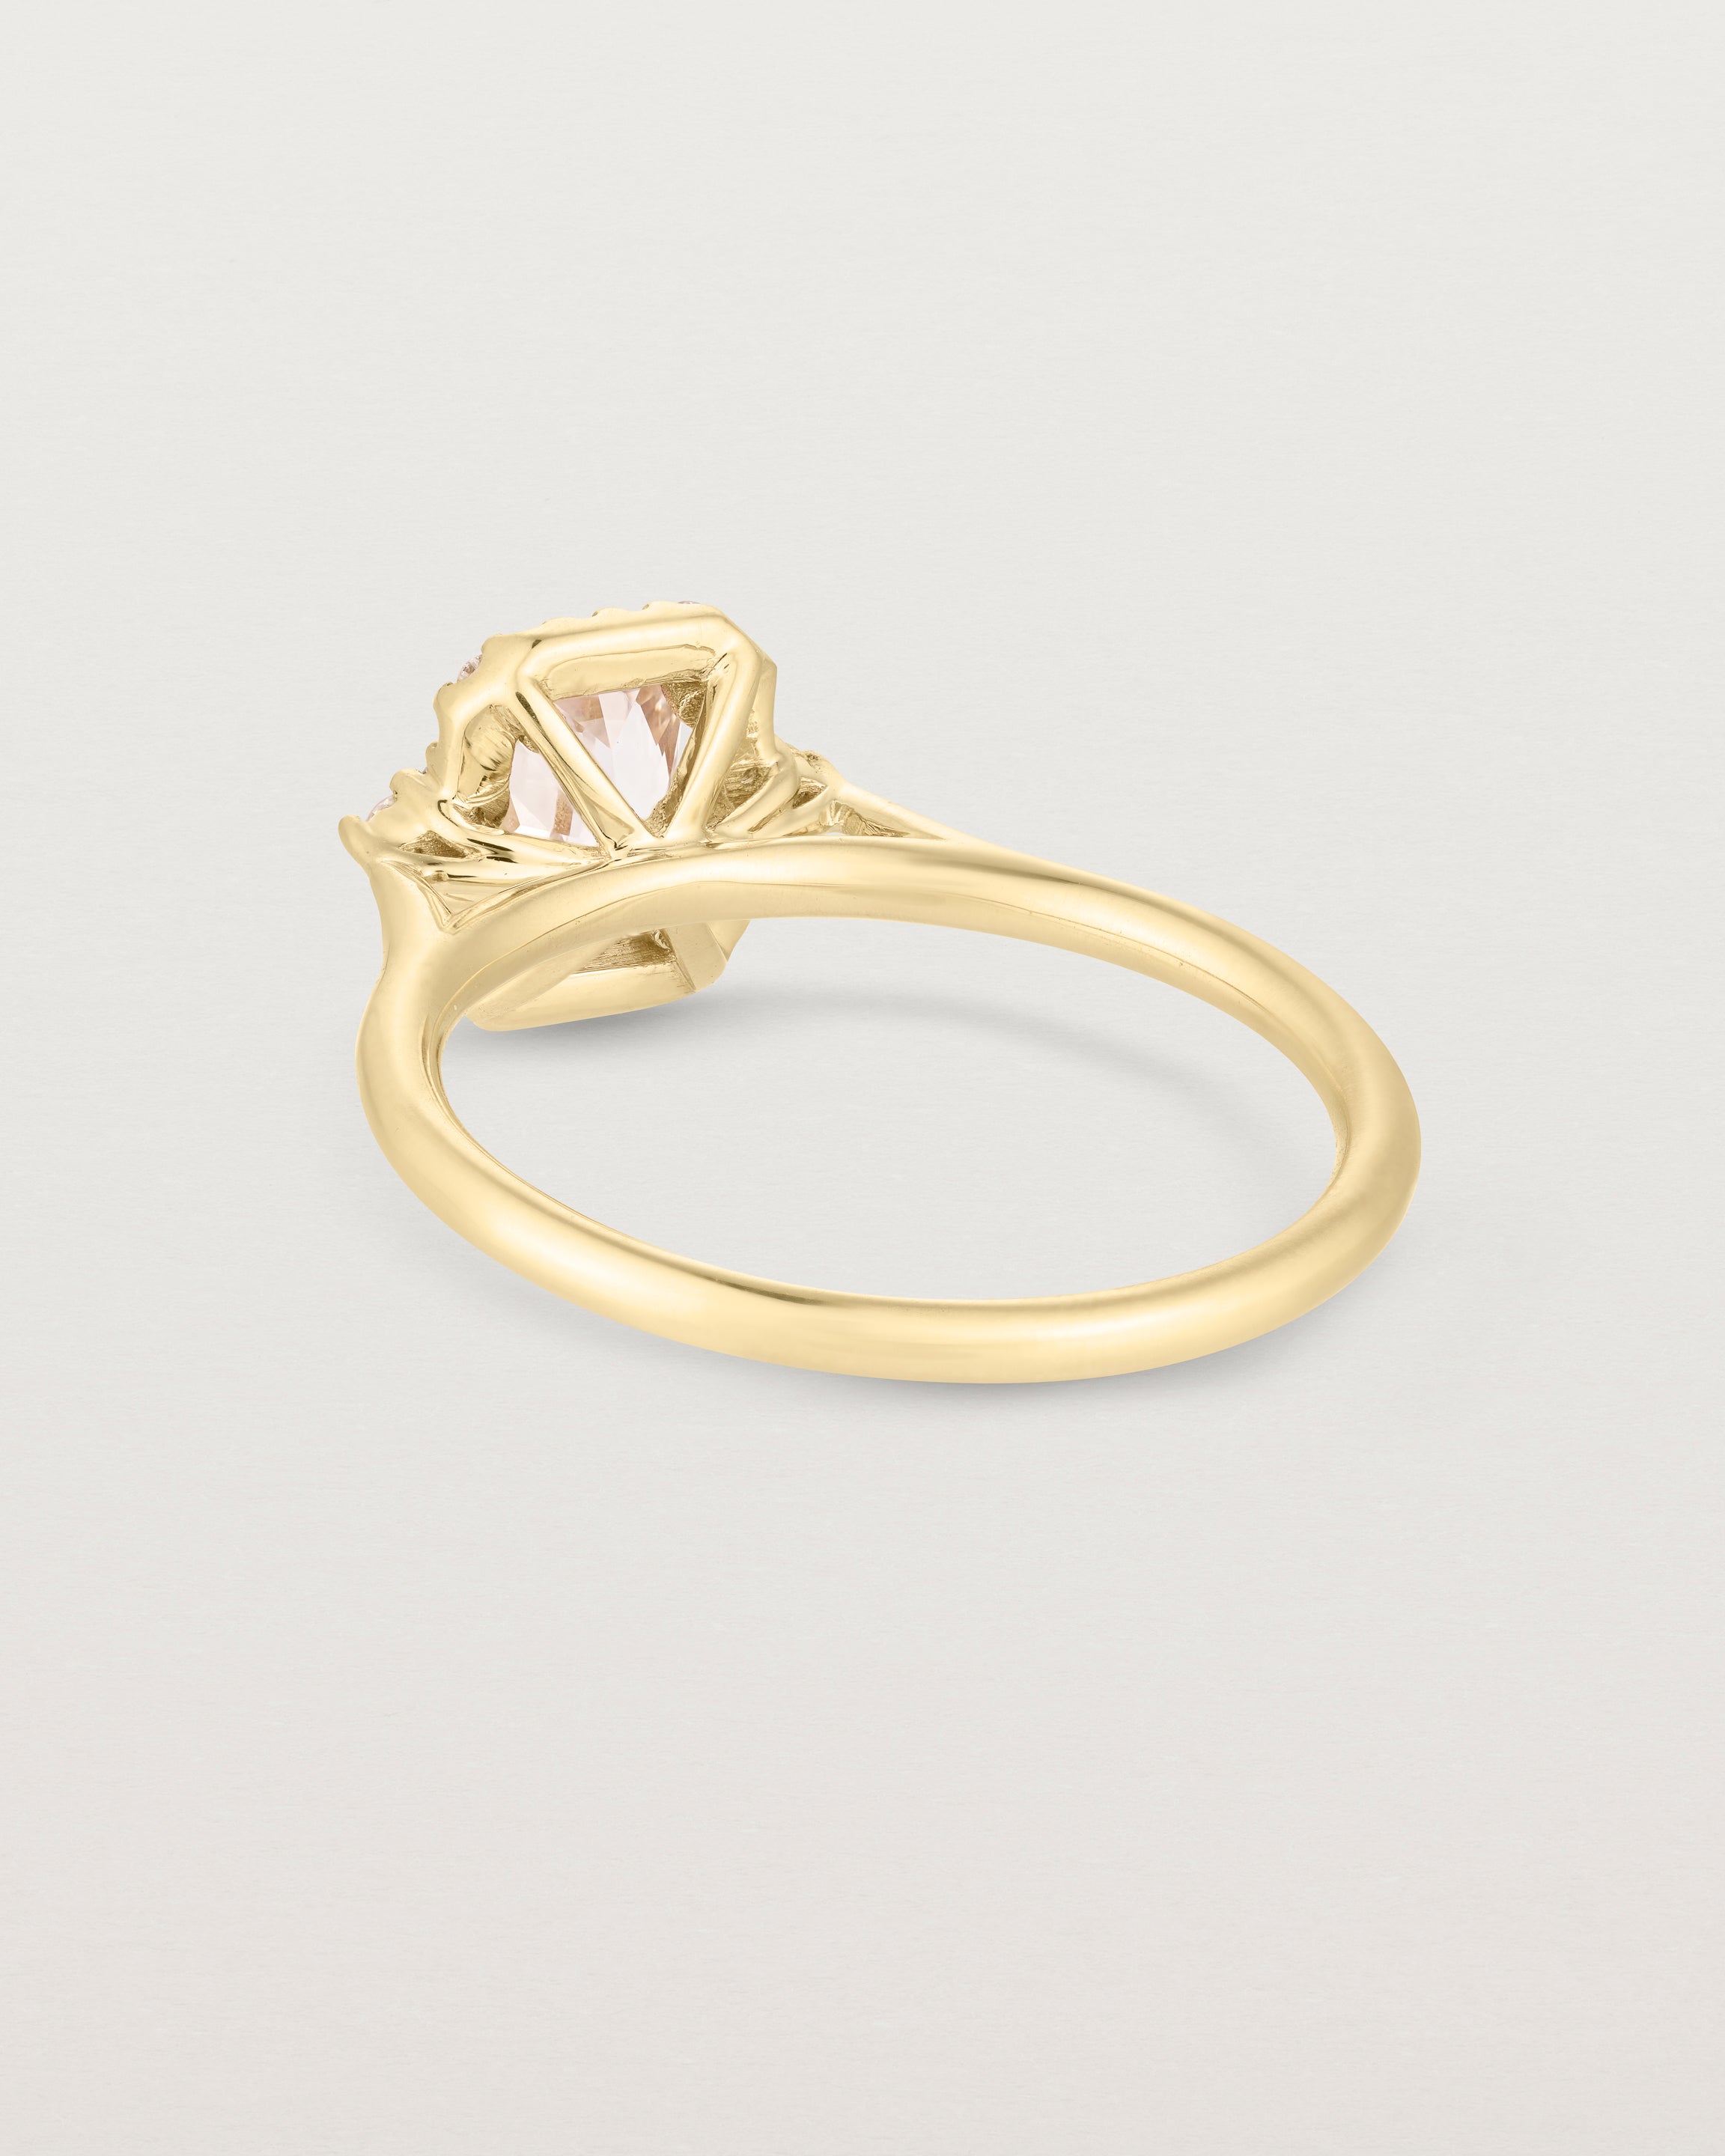 Back image of the winona ring with a peach sapphire in yellow gold.